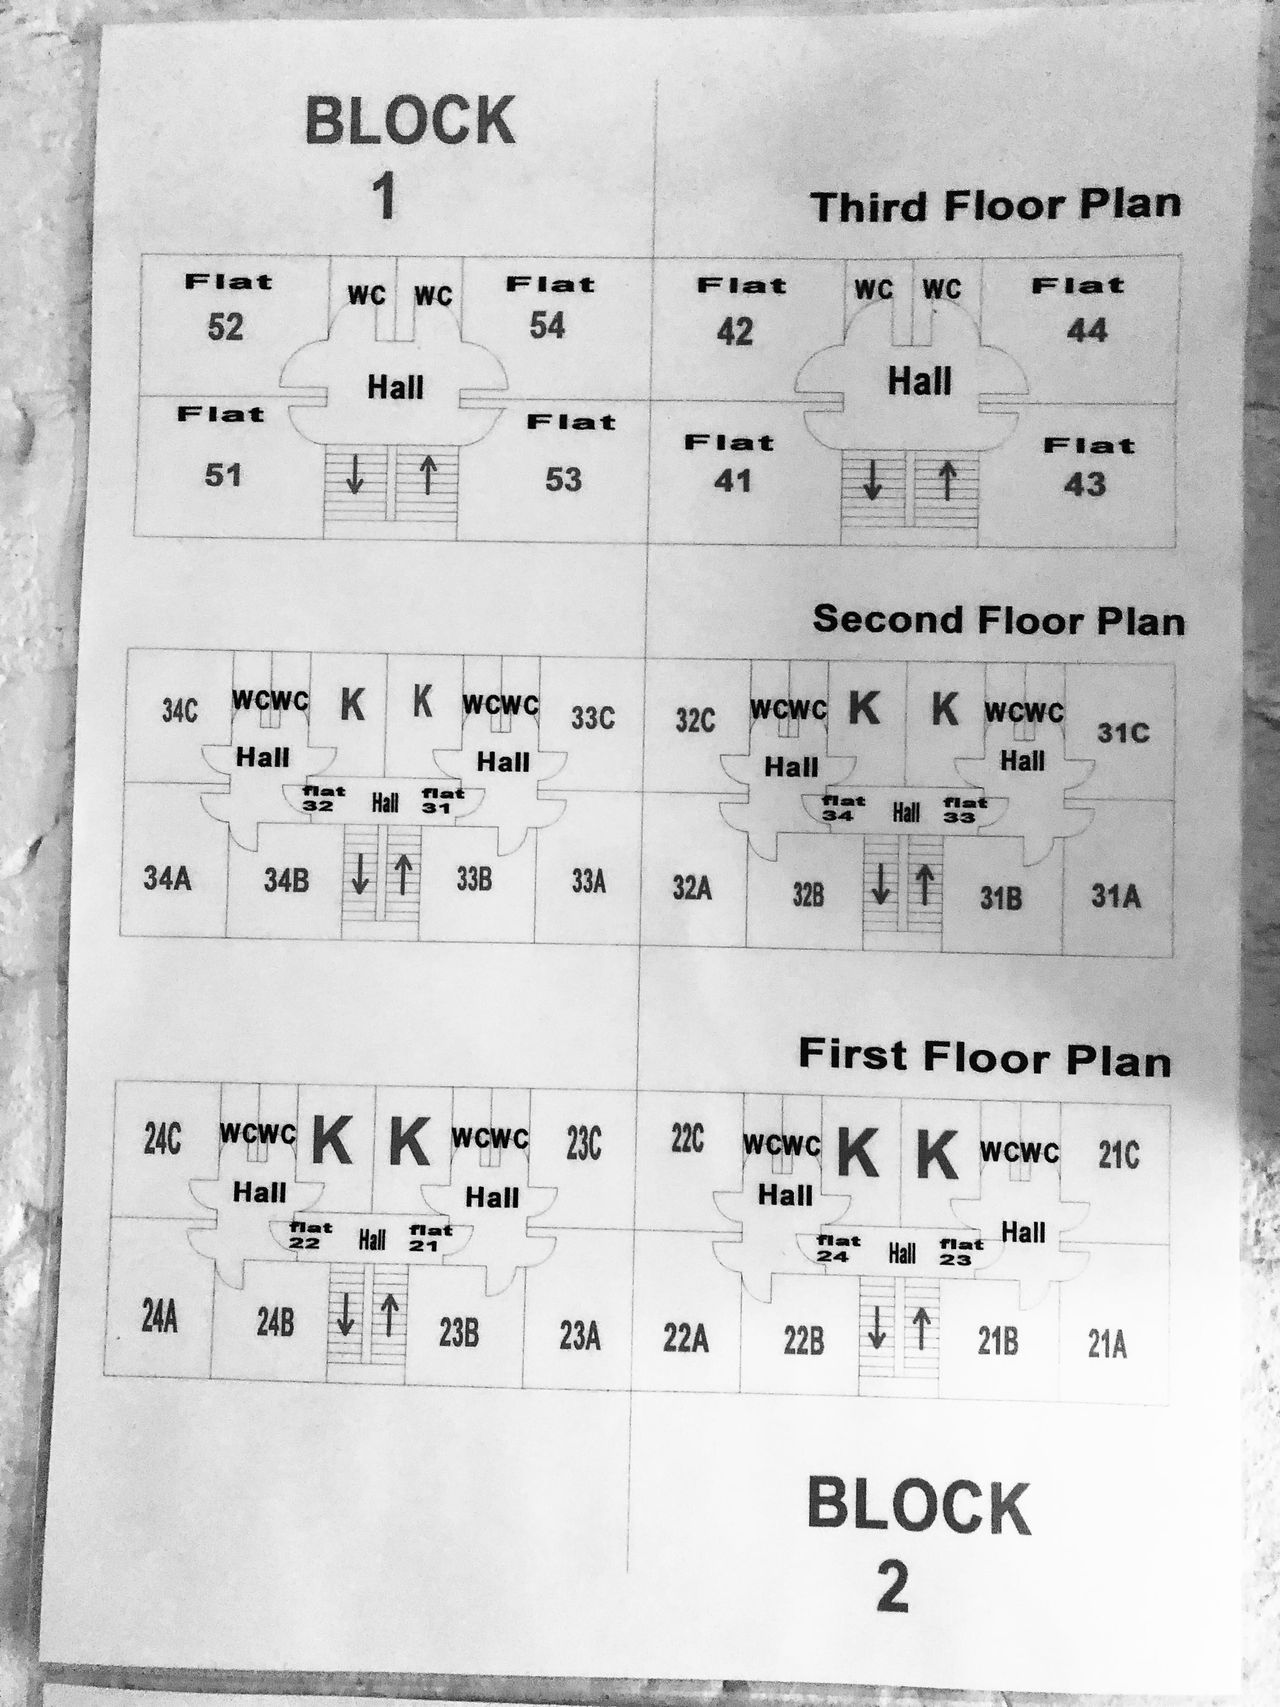 Floor plans in the building where Jankhana lives show how flats on the first and second floor are divided into separate units of accommodation with shared kitchens and bathrooms